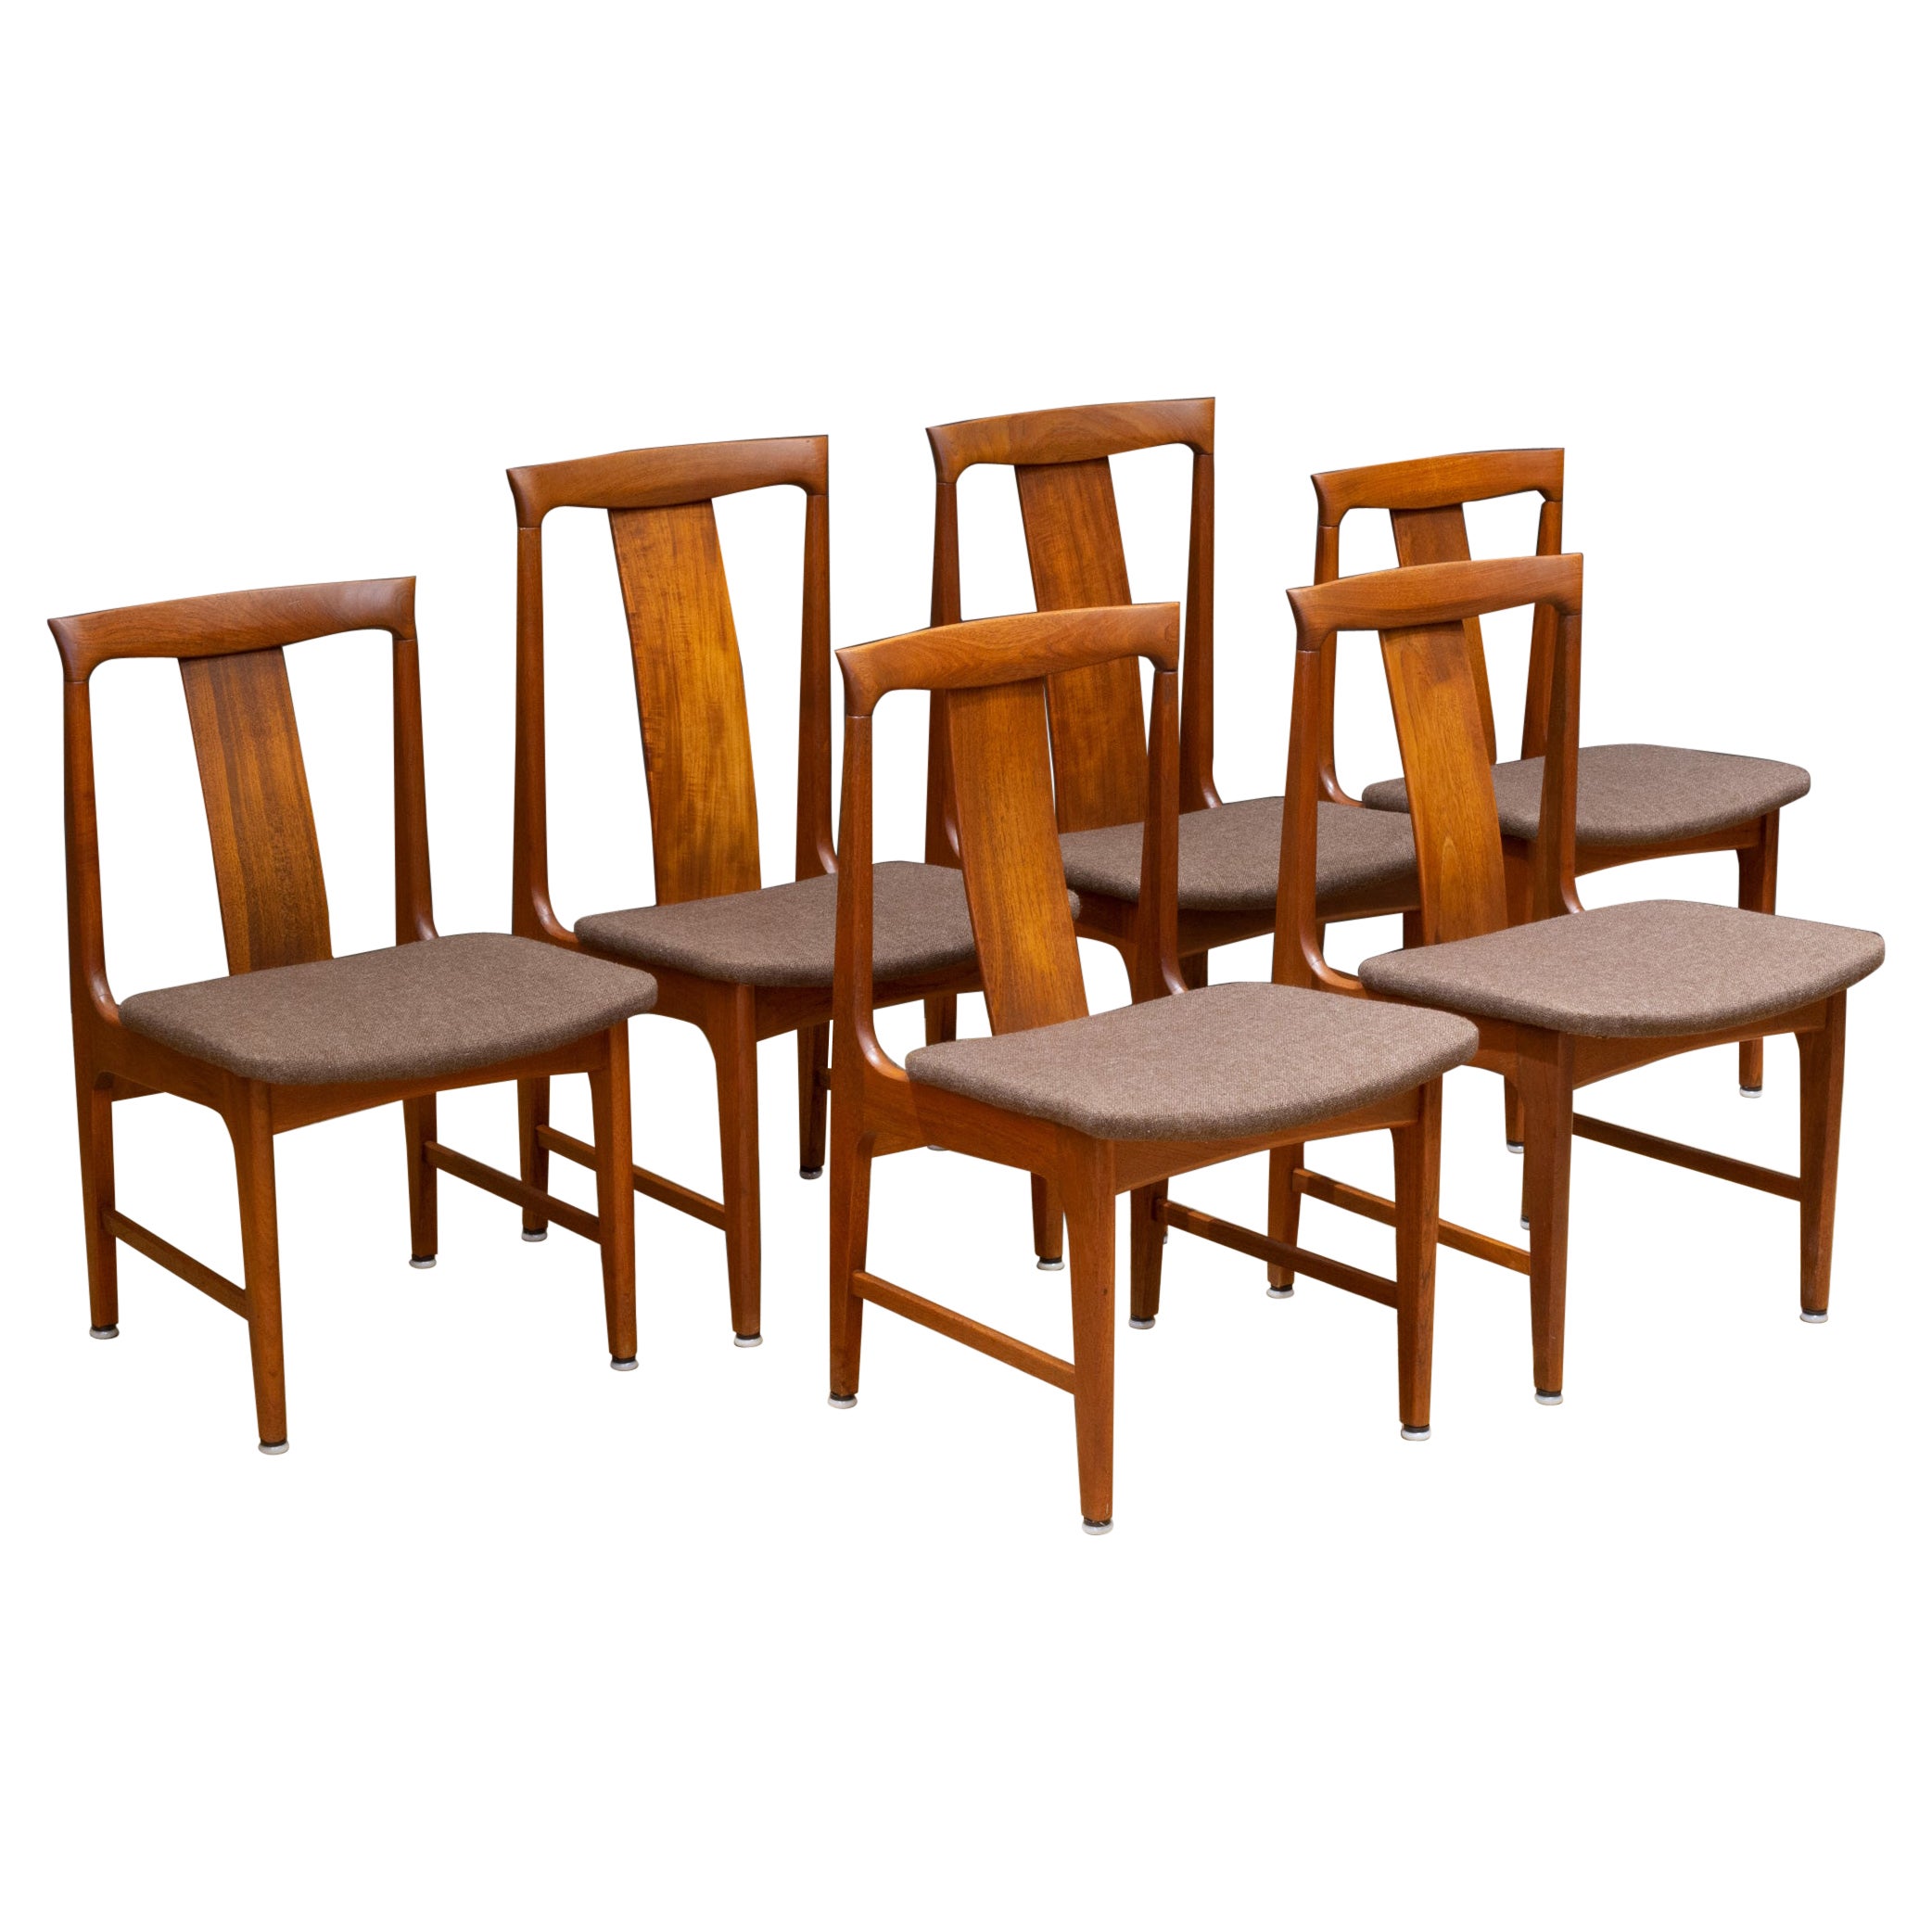 Midcentury Japanese Sculpted Teak Dining Chairs C.1960 For Sale